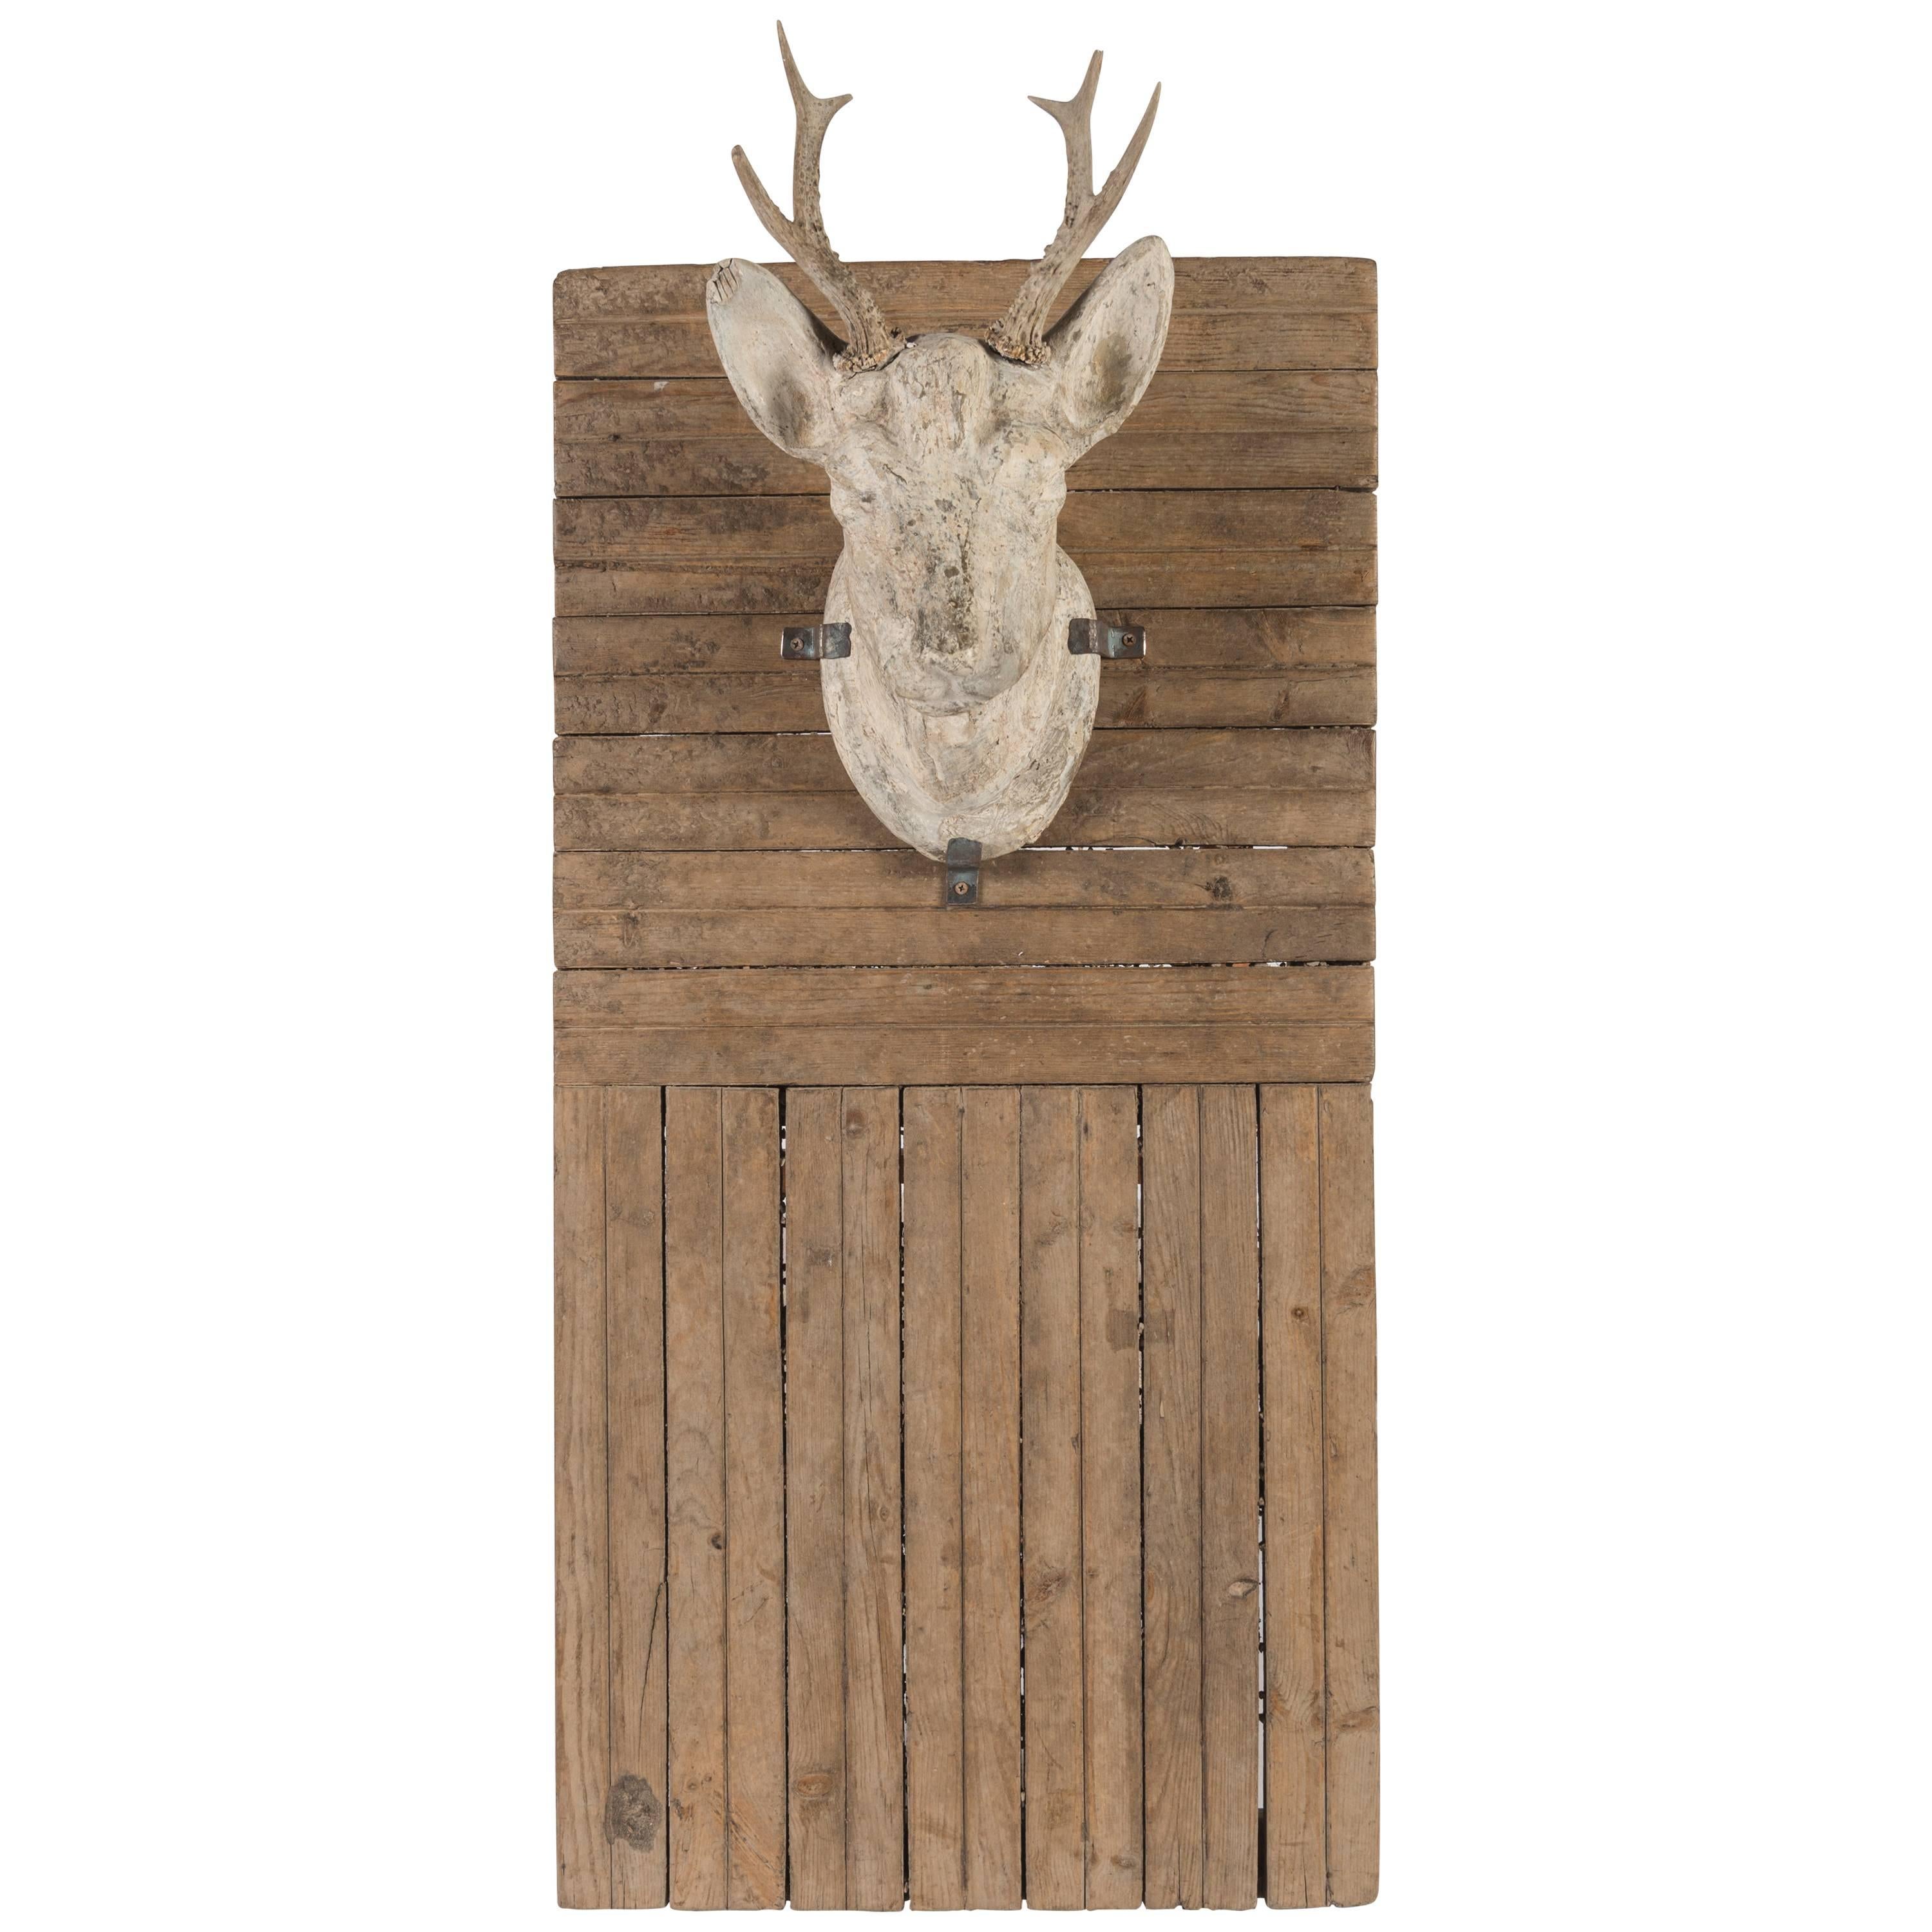 Plaster Stag's Head on Board